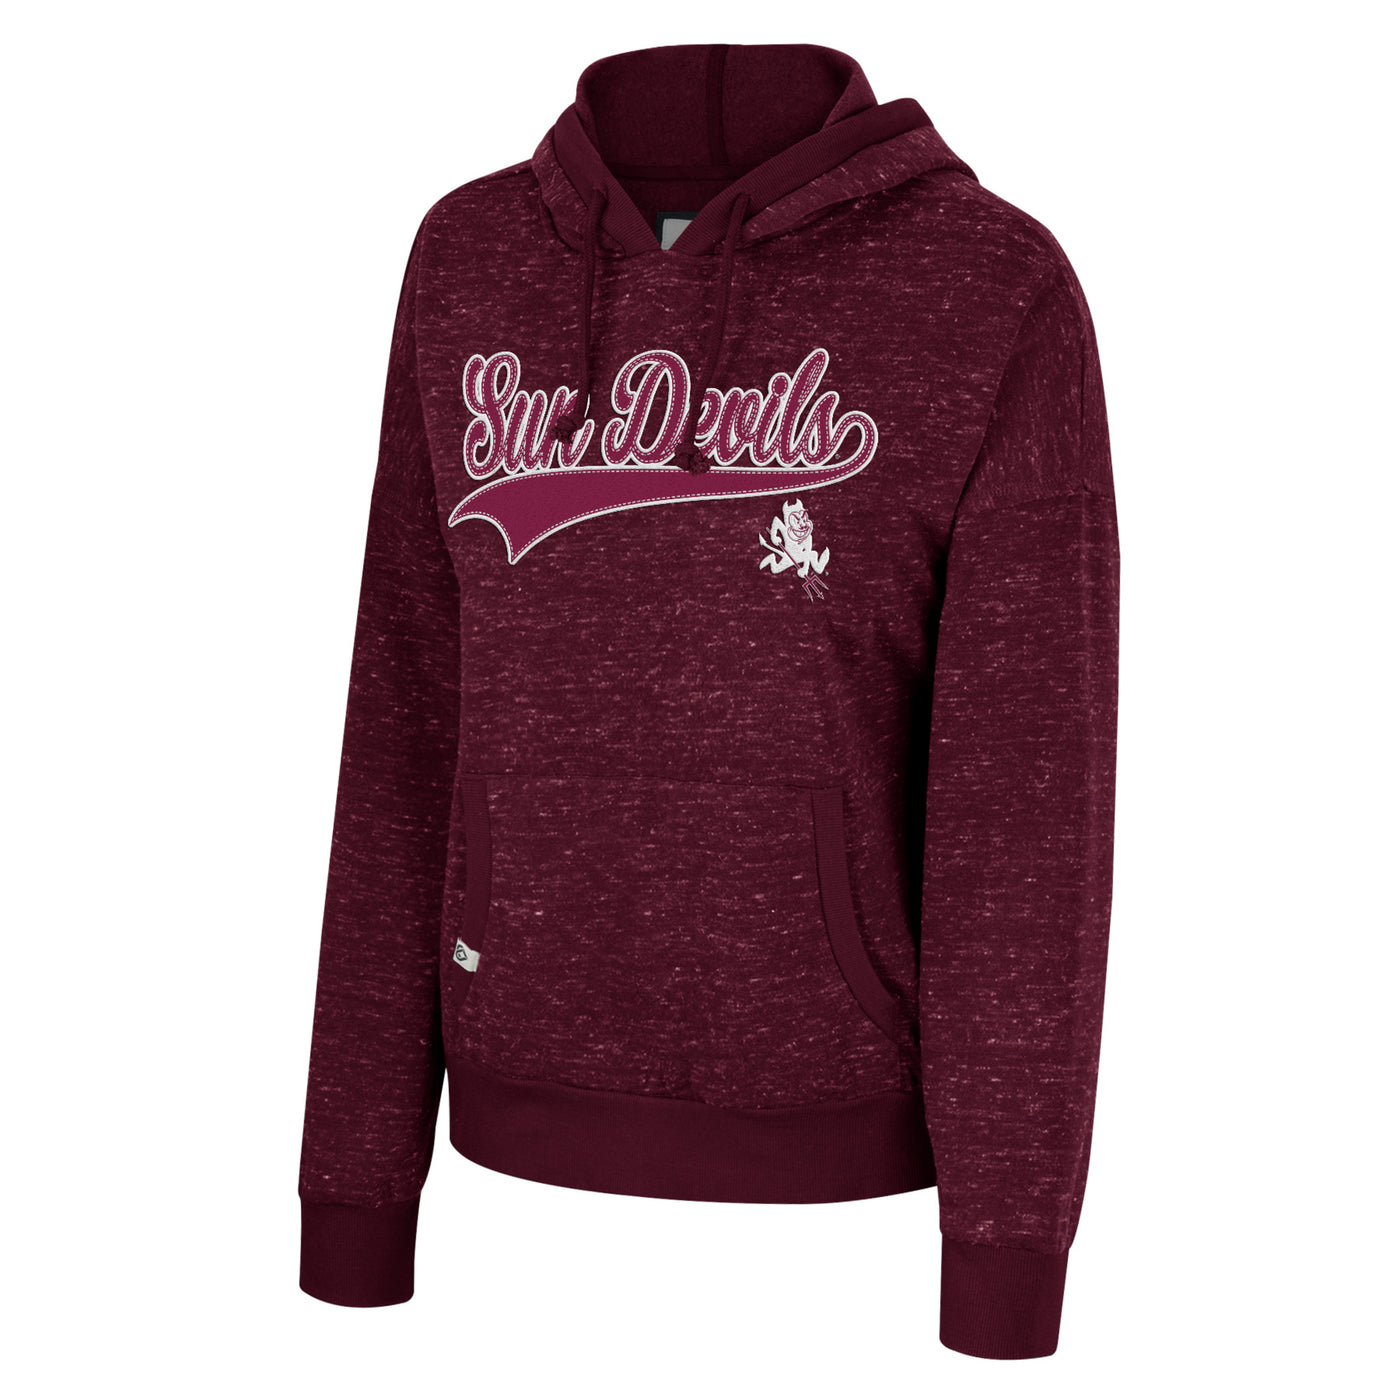 ASU maroon and white specked hoodie. The cursive text 